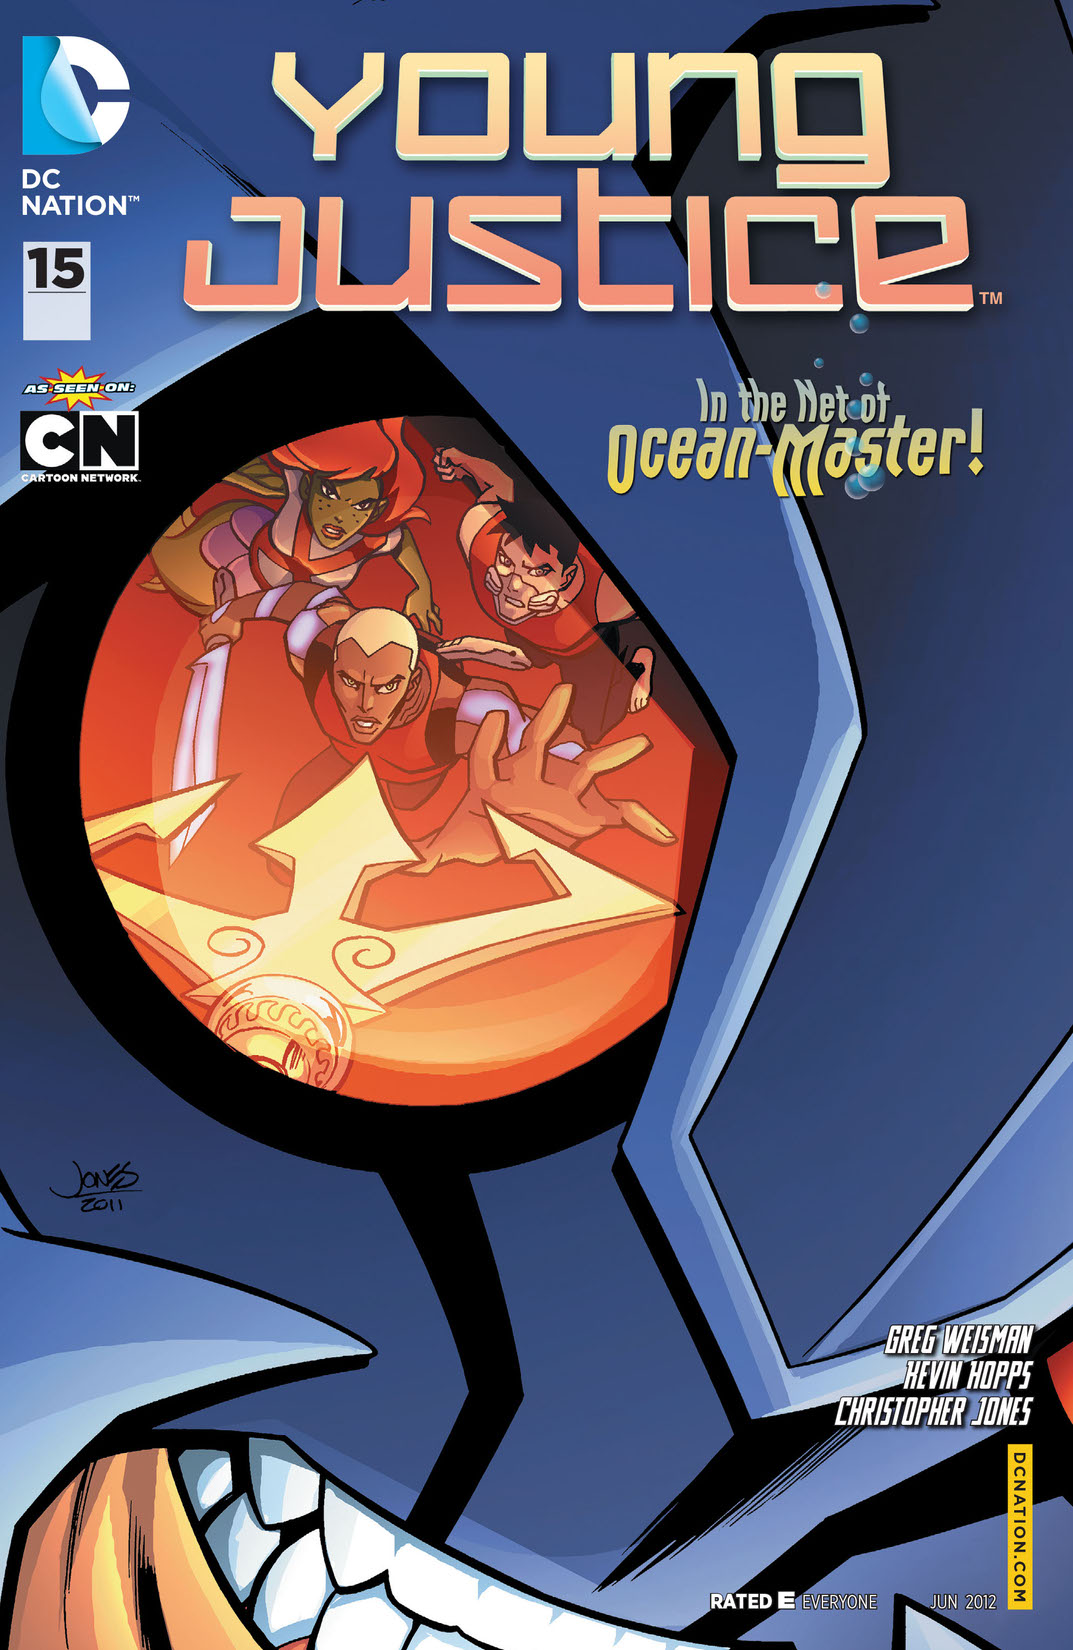 Young Justice (2011-2013) #15 preview images